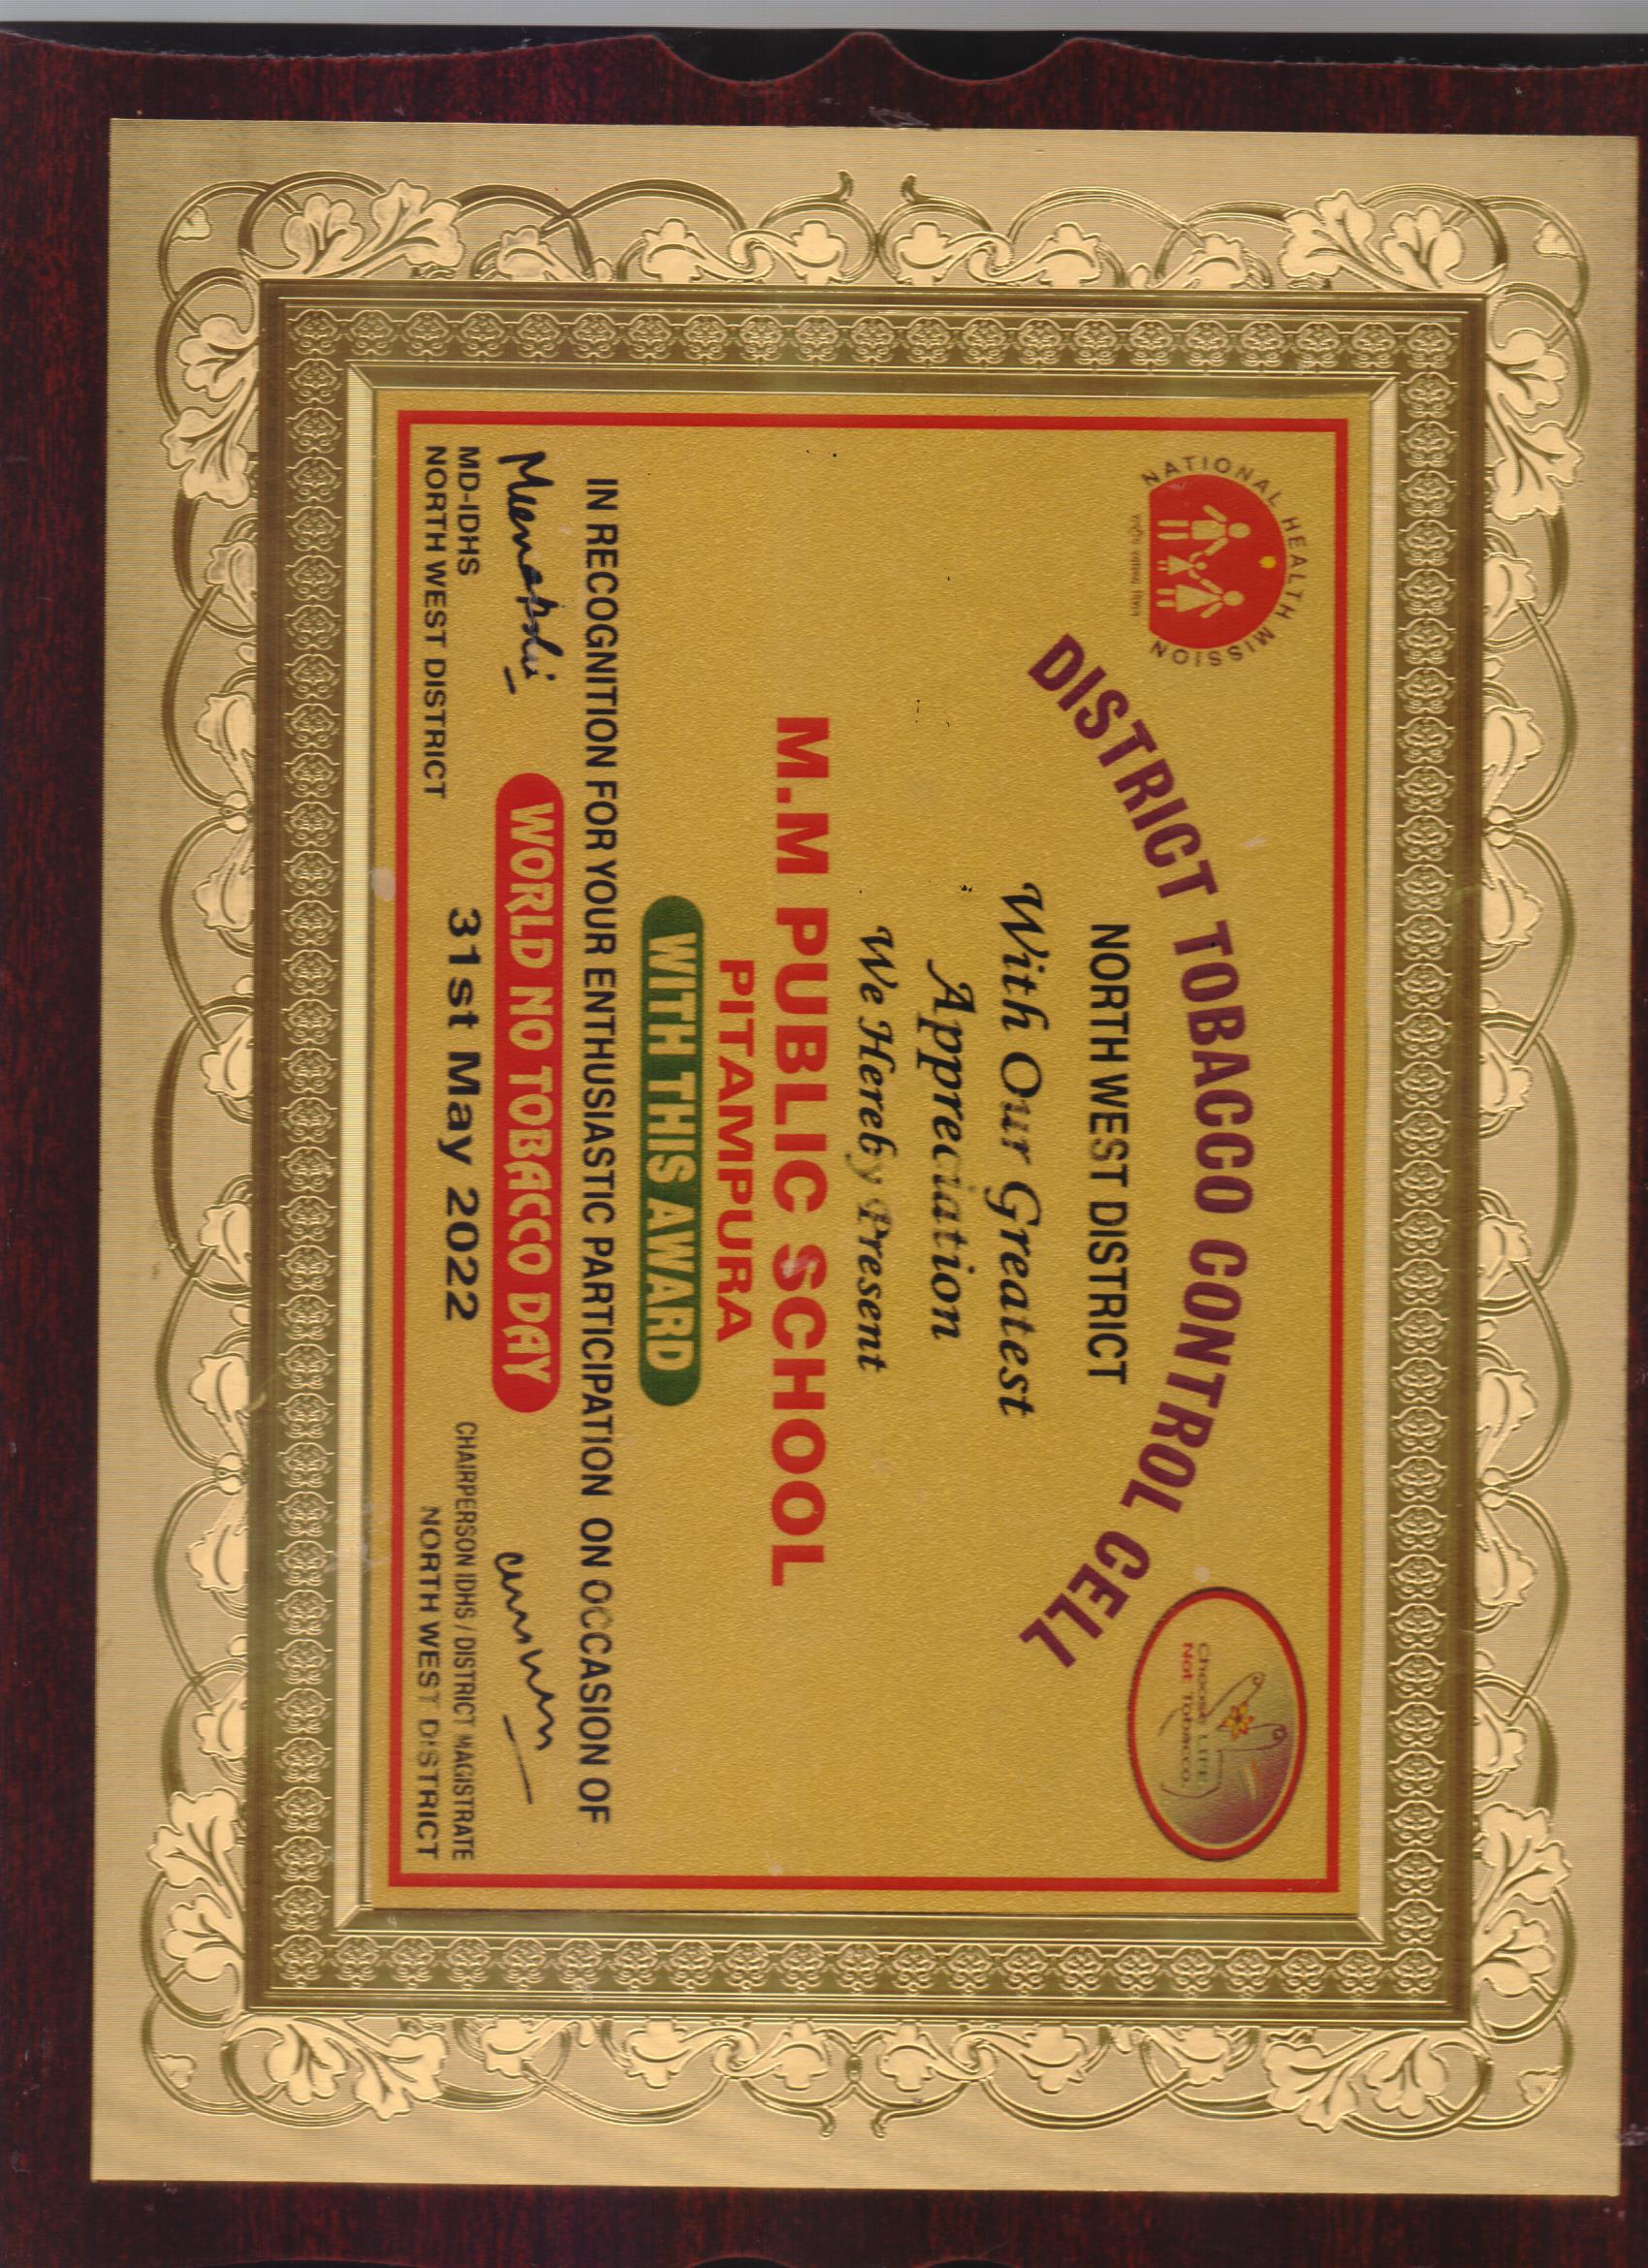 Recognition of MMPS by District Tobacco Control Cell